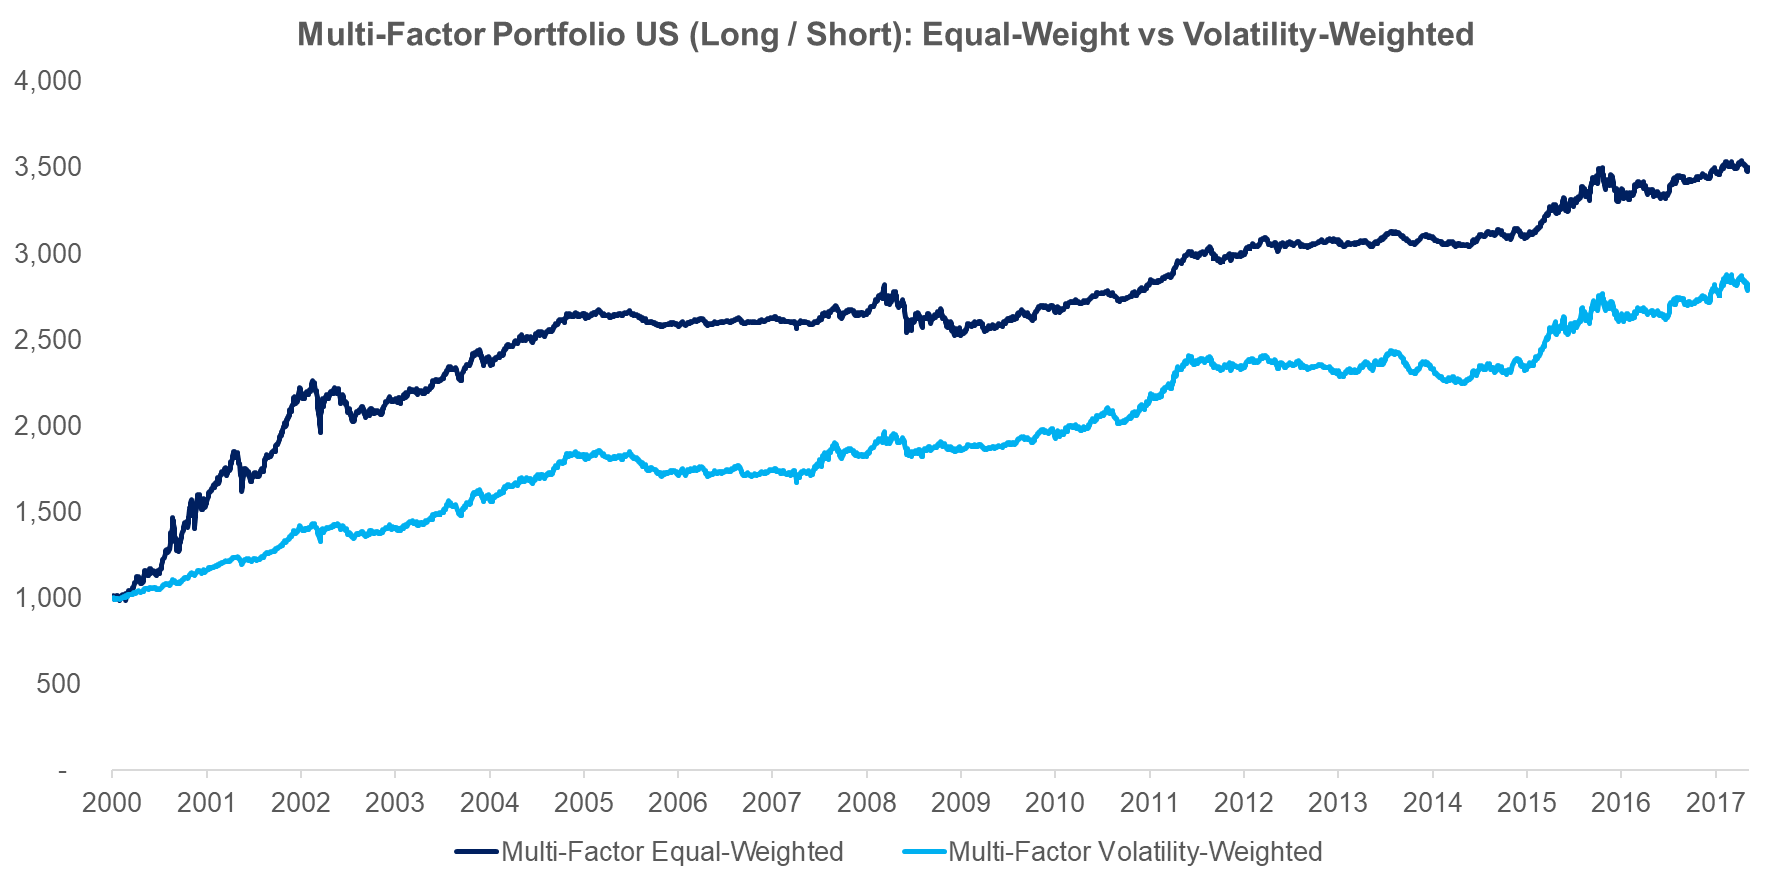 Multi-Factor Portfolio US (Long Short) Equal-Weight vs Volatility-Weighted